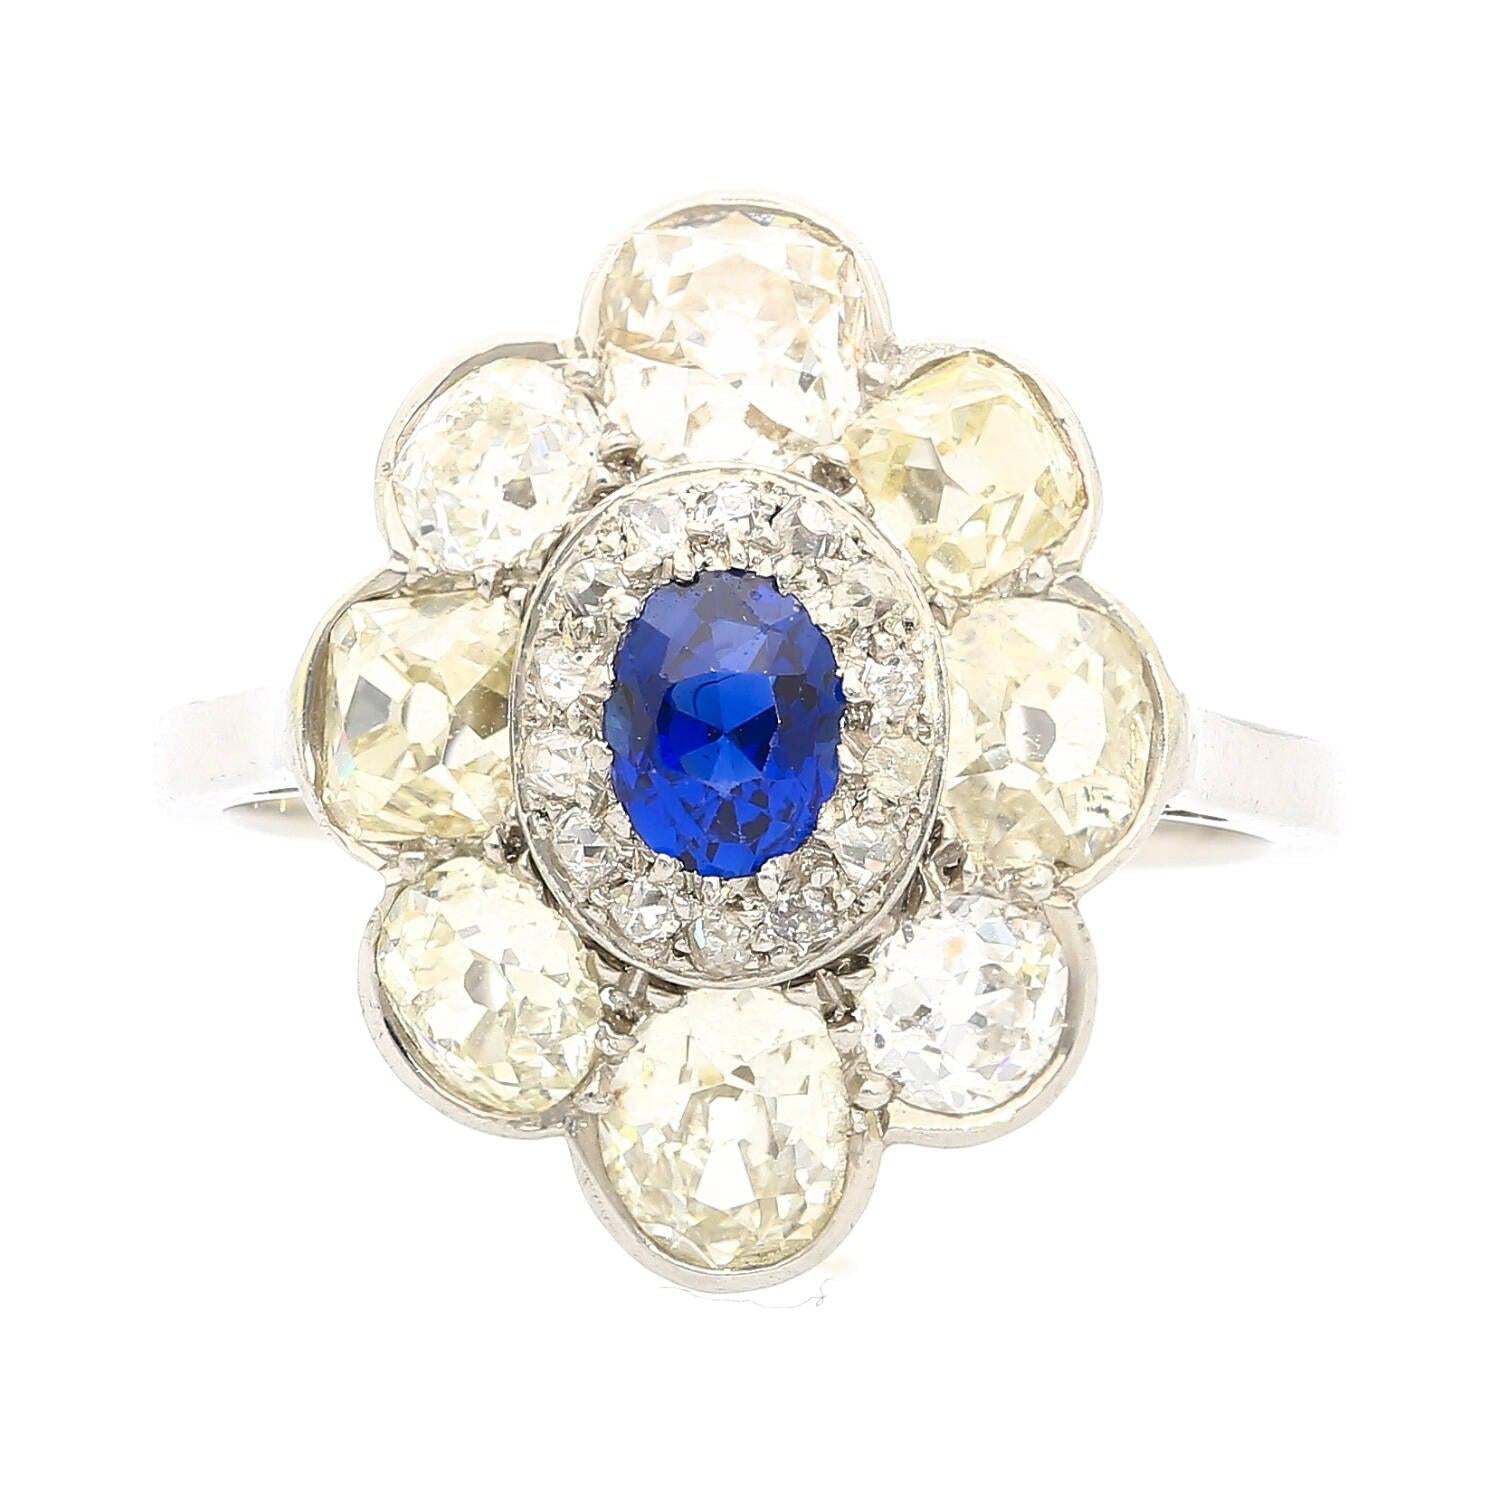 Vintage-AGL-Certified-No-Heat-Burma-Blue-Sapphire-and-Old-Euro-Cut-Diamond-Ring-in-Platinum-Rings.jpg